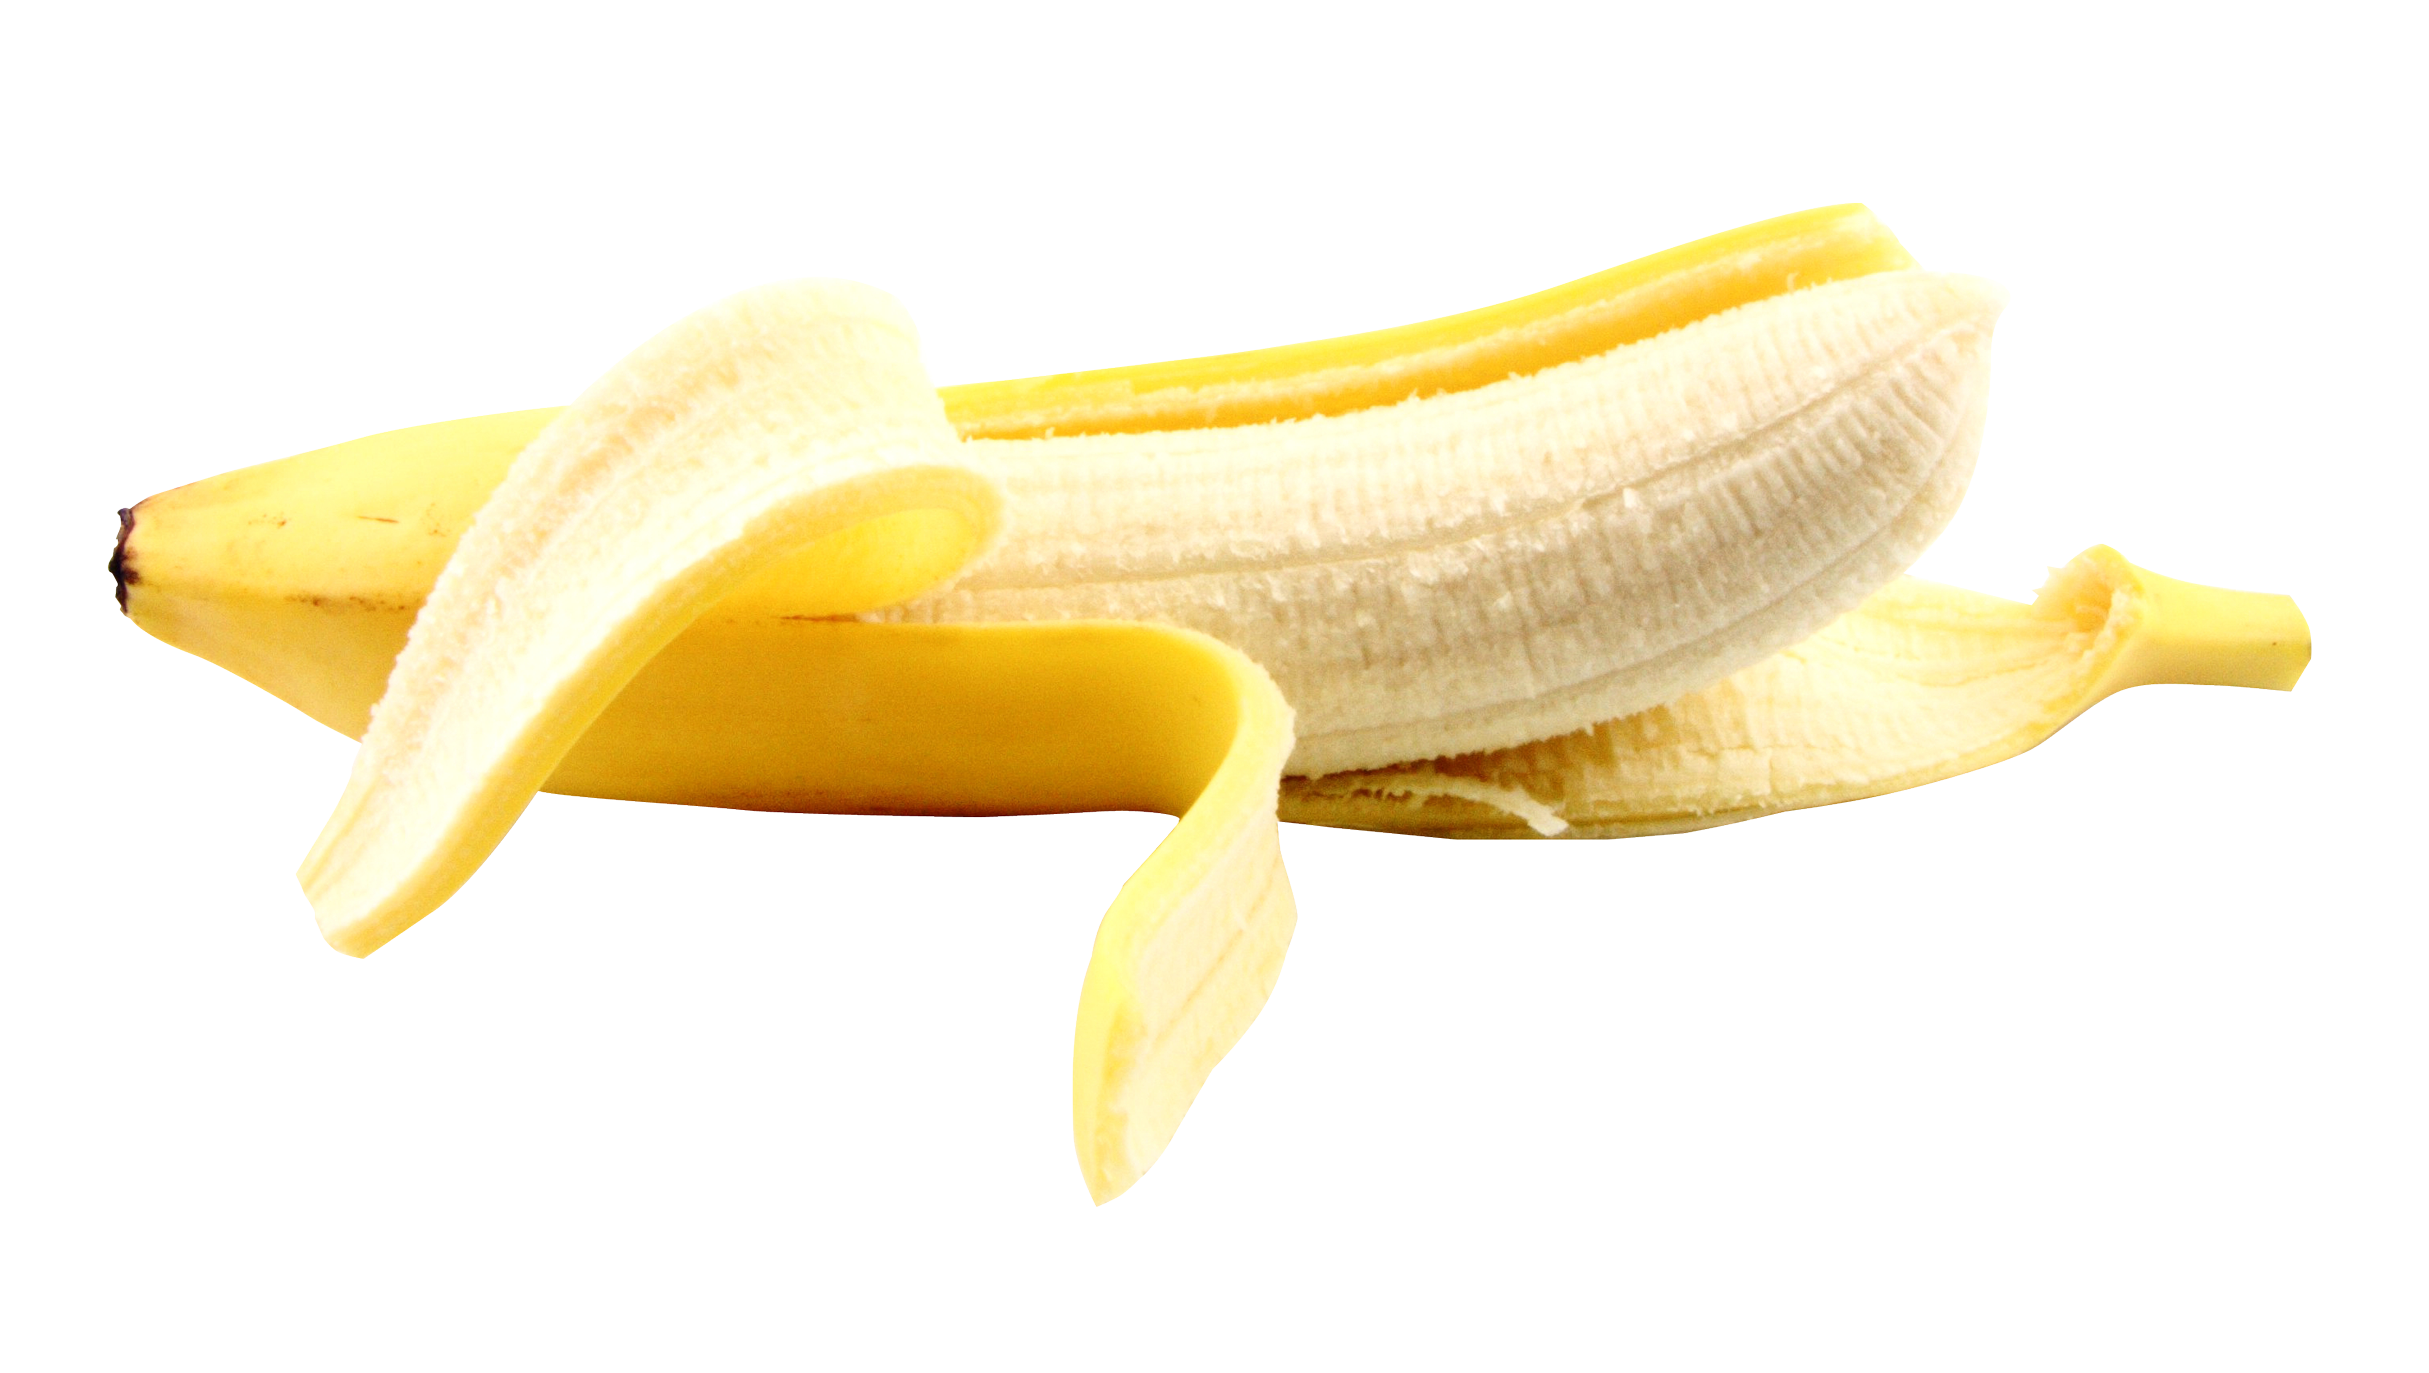 Png image purepng free. Clipart banana open